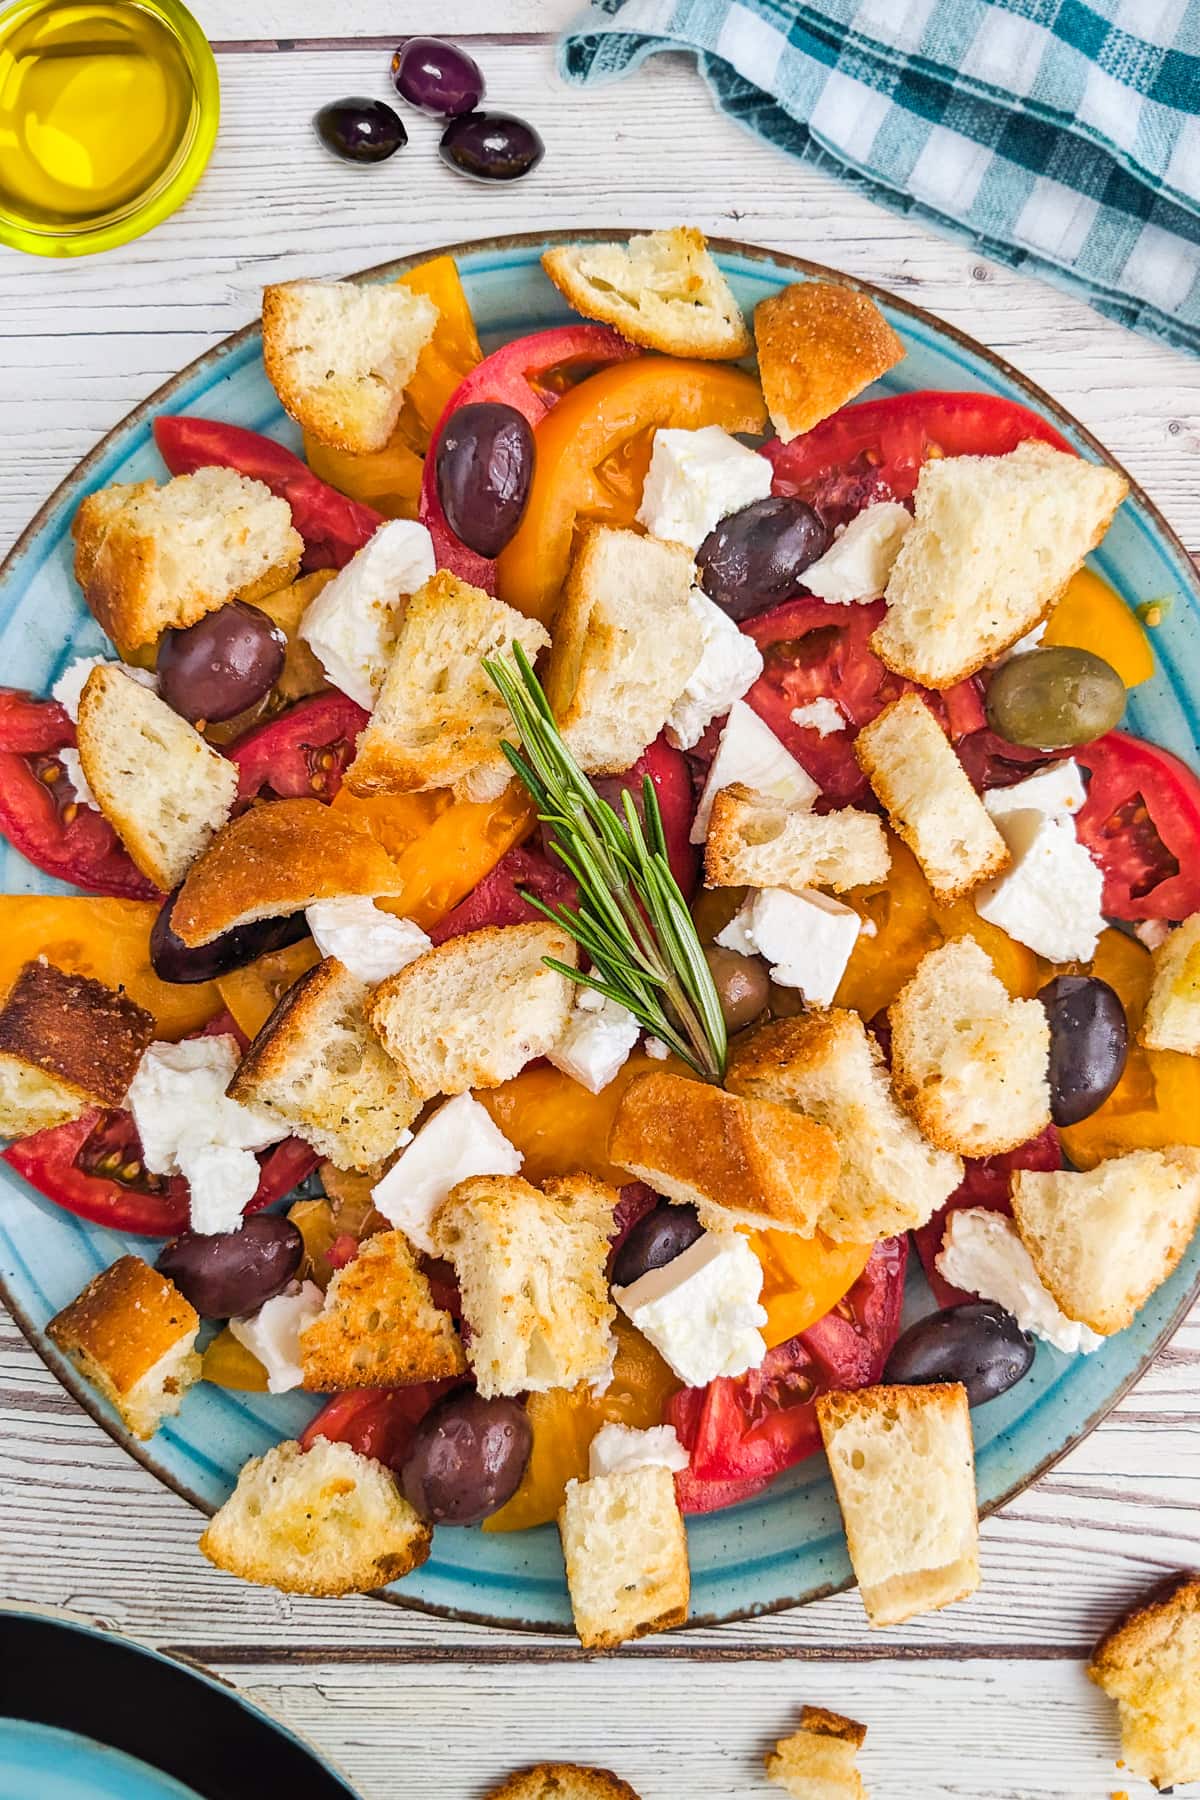 Top view of tomato and feta salad with croutons on a wooden table.